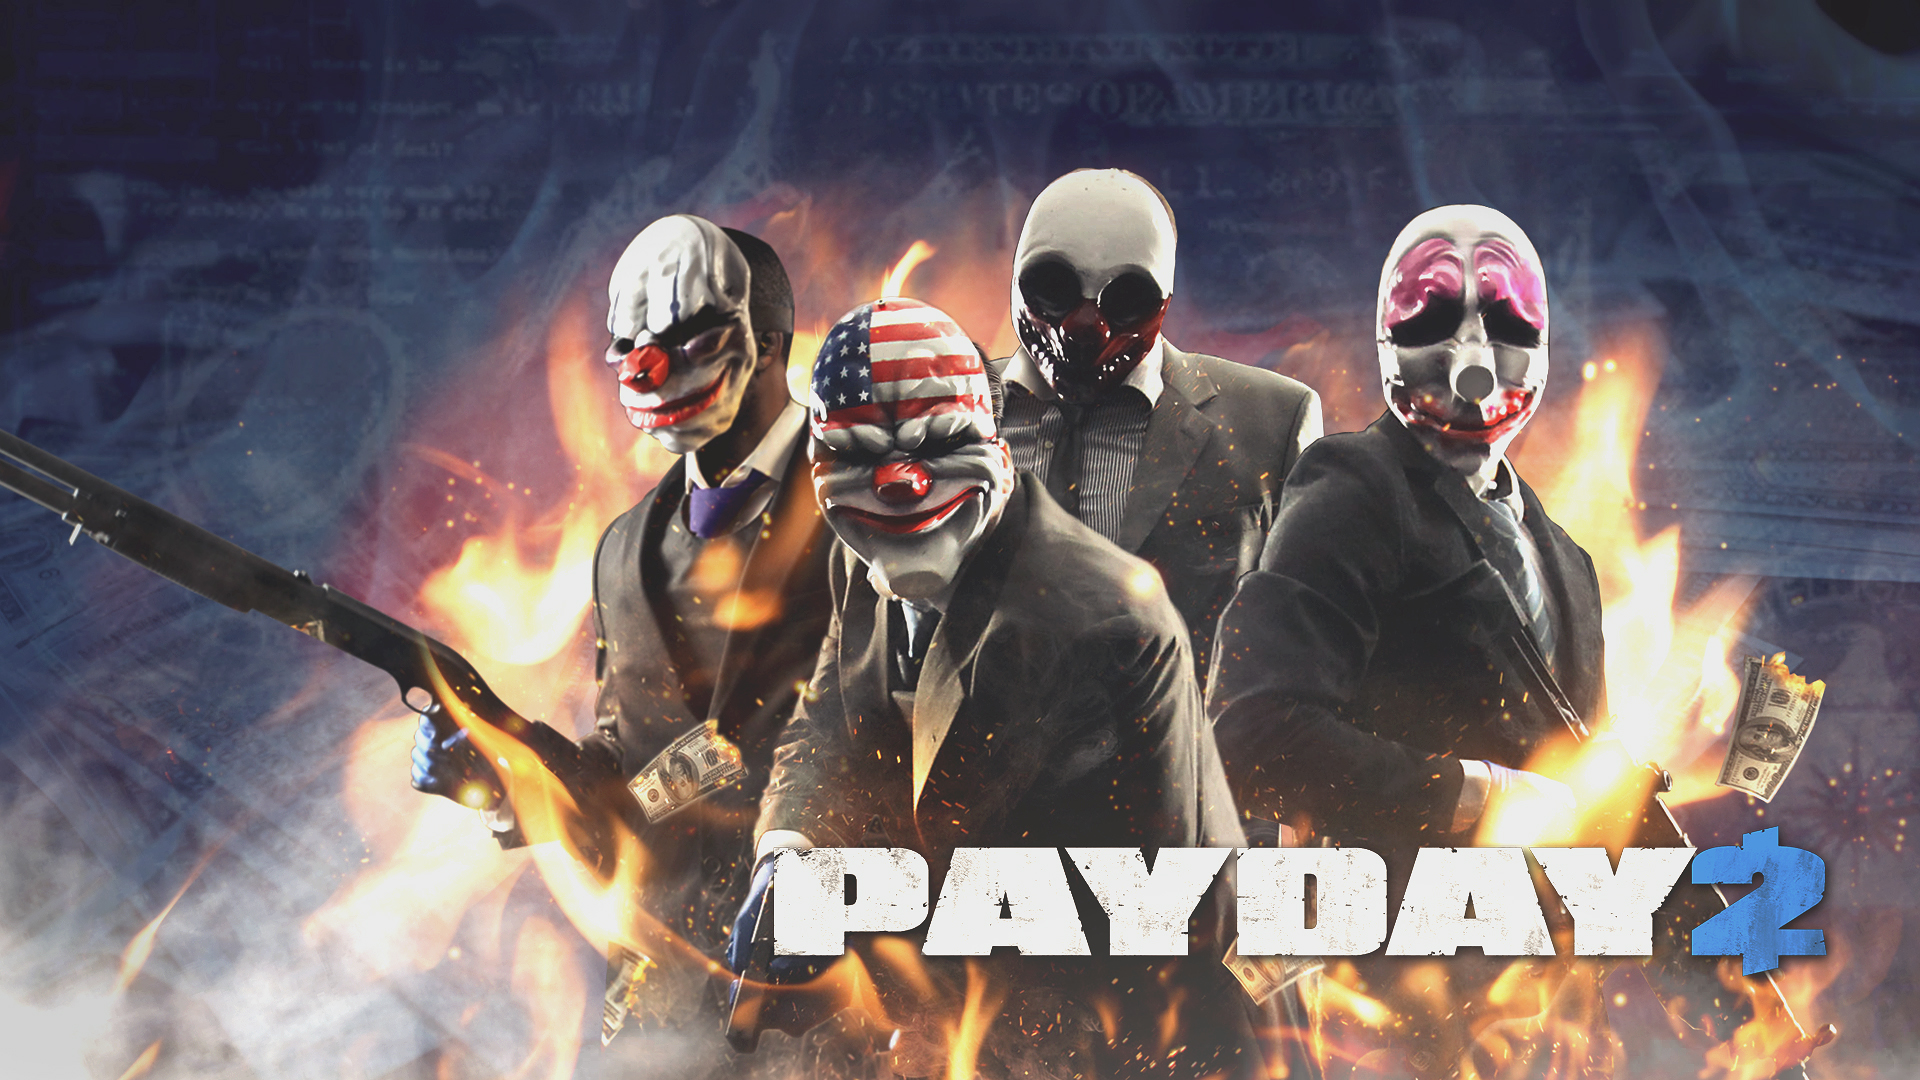 Bank go payday 2 фото 105